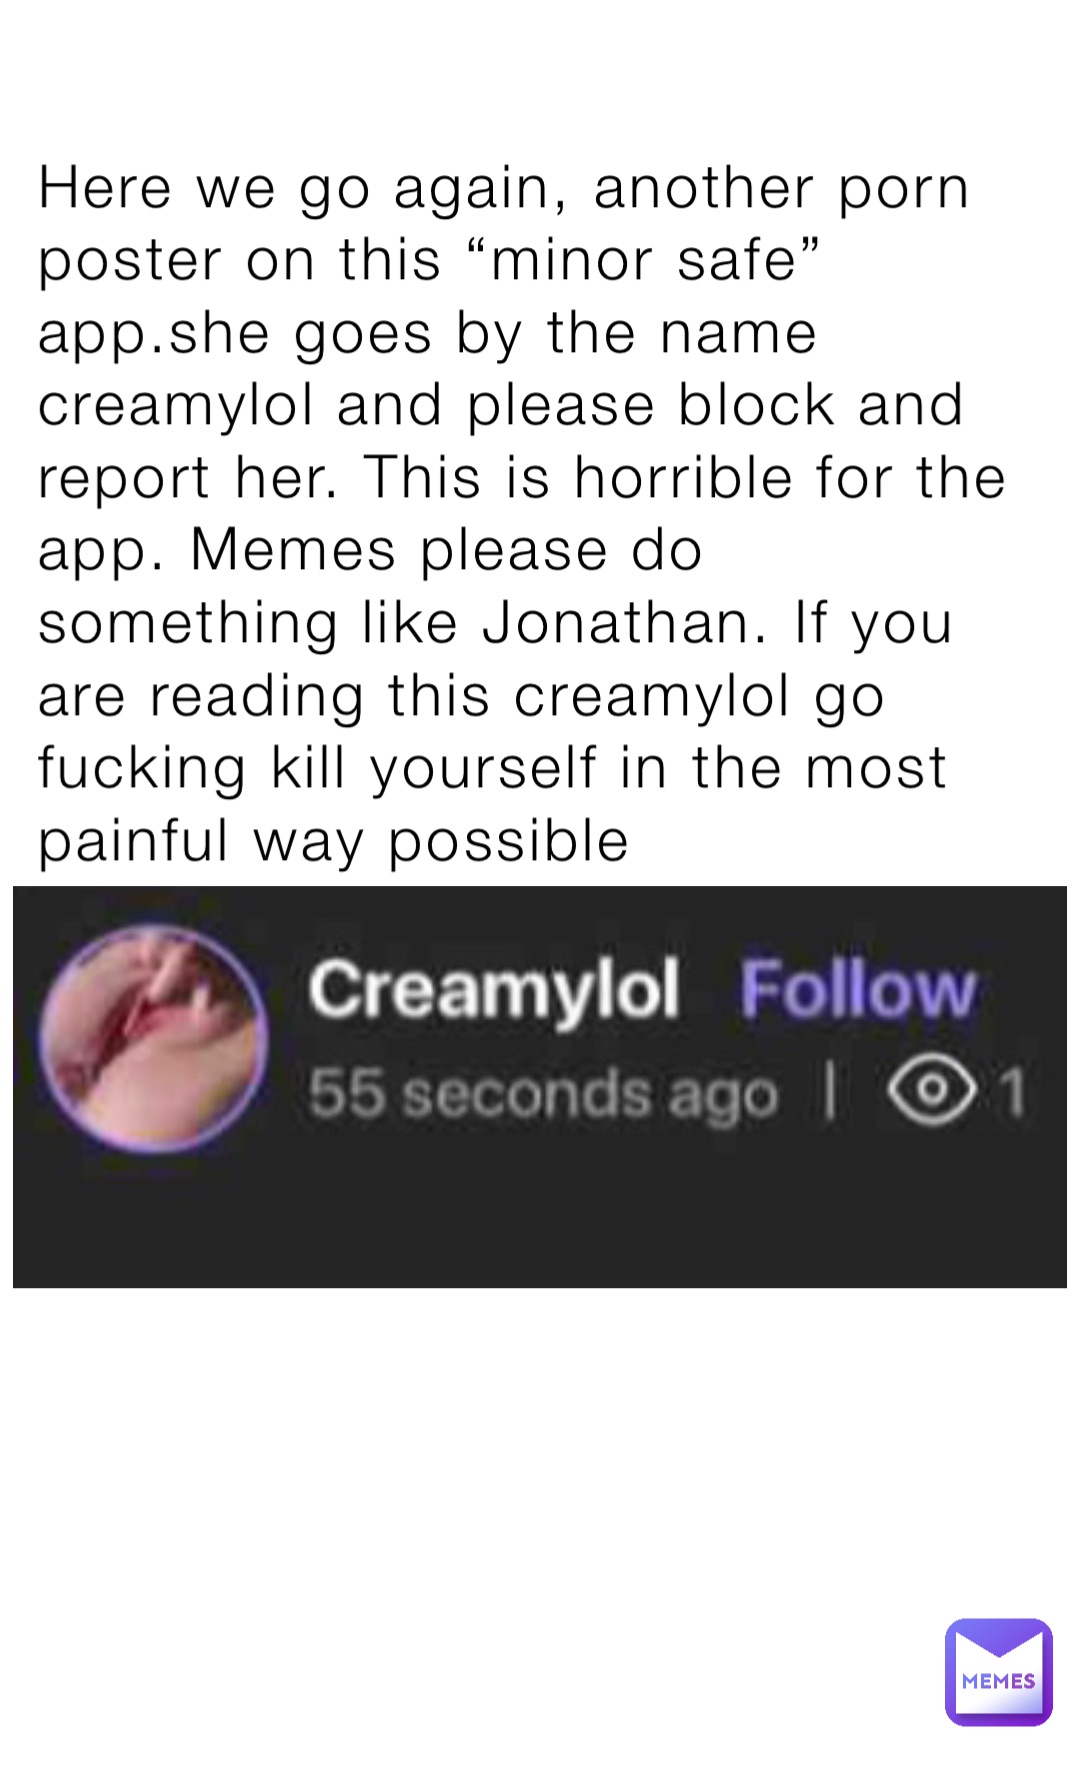 Here we go again, another porn poster on this “minor safe” app.she goes by the name creamylol and please block and report her. This is horrible for the app. Memes please do something like Jonathan. If you are reading this creamylol go fucking kill yourself in the most painful way possible